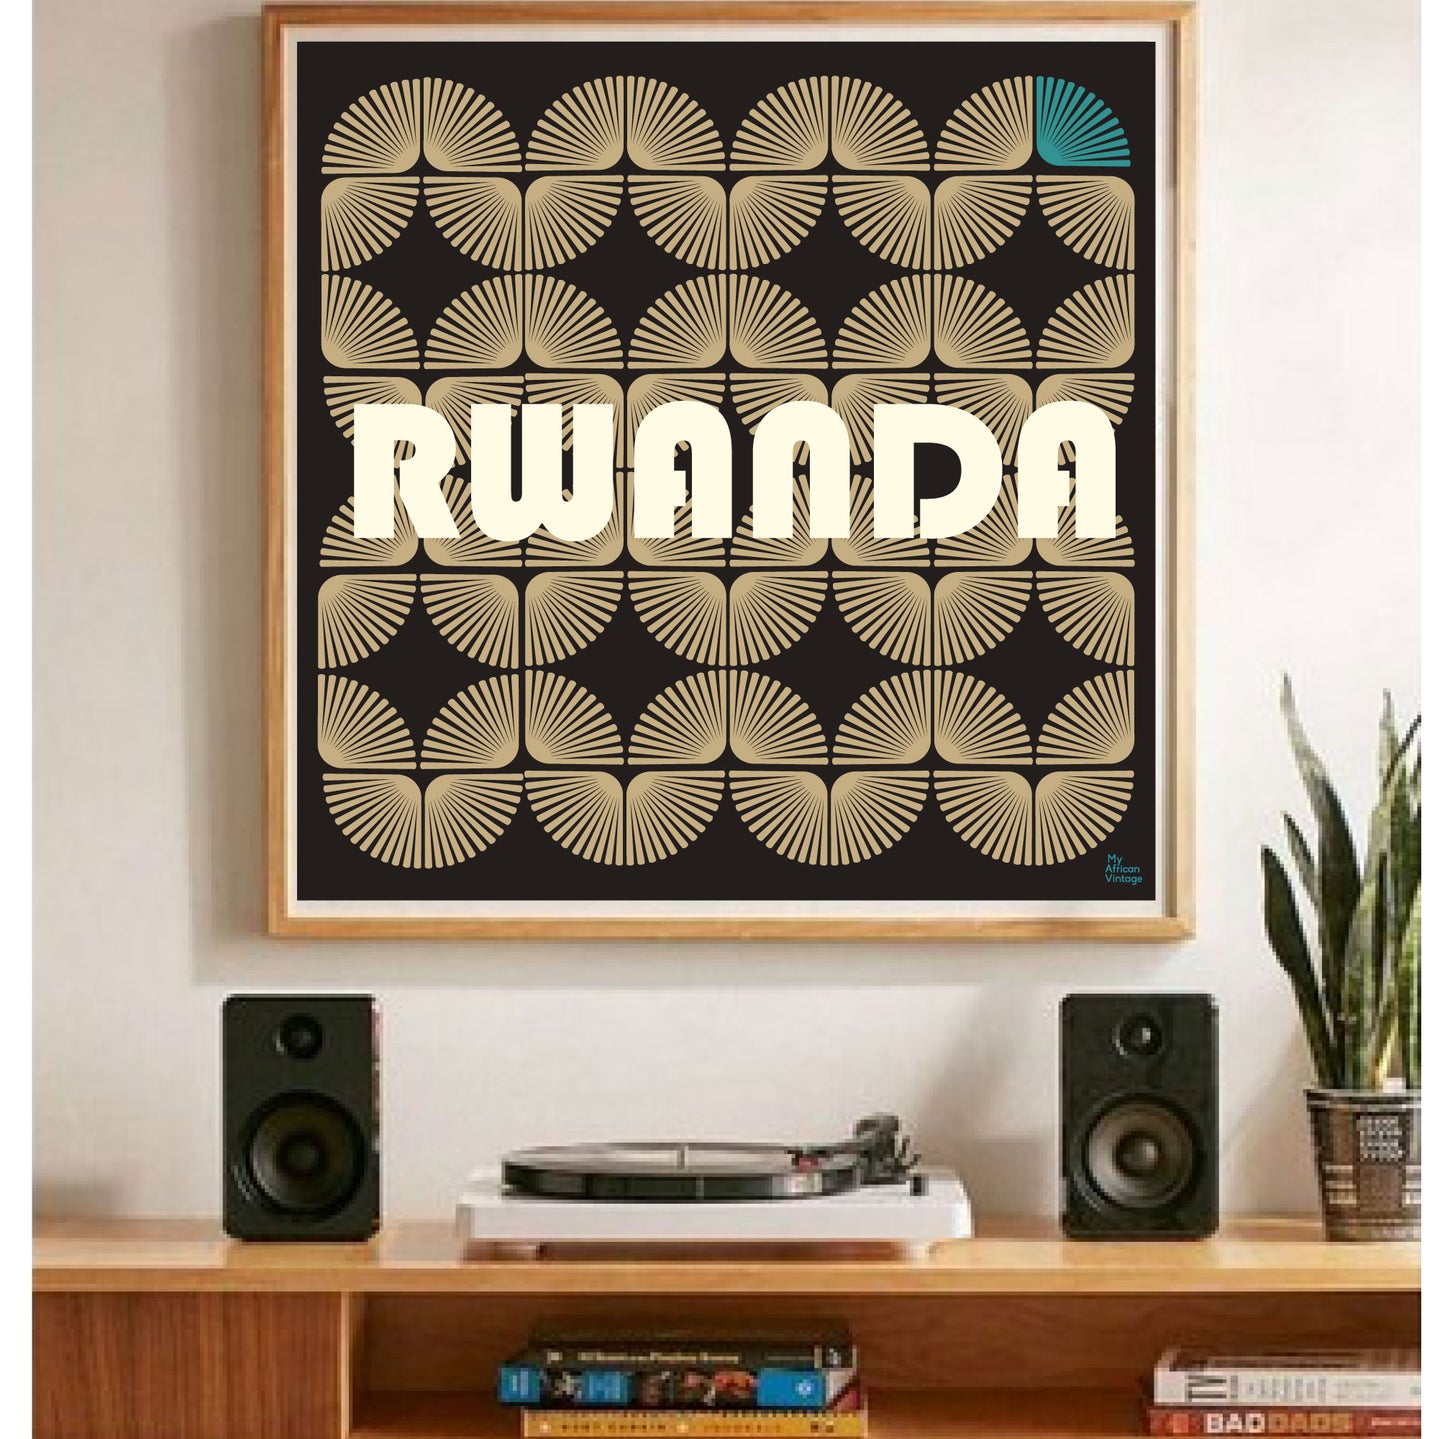 "Rwanda" retro style poster  - "My African Vintage" collection